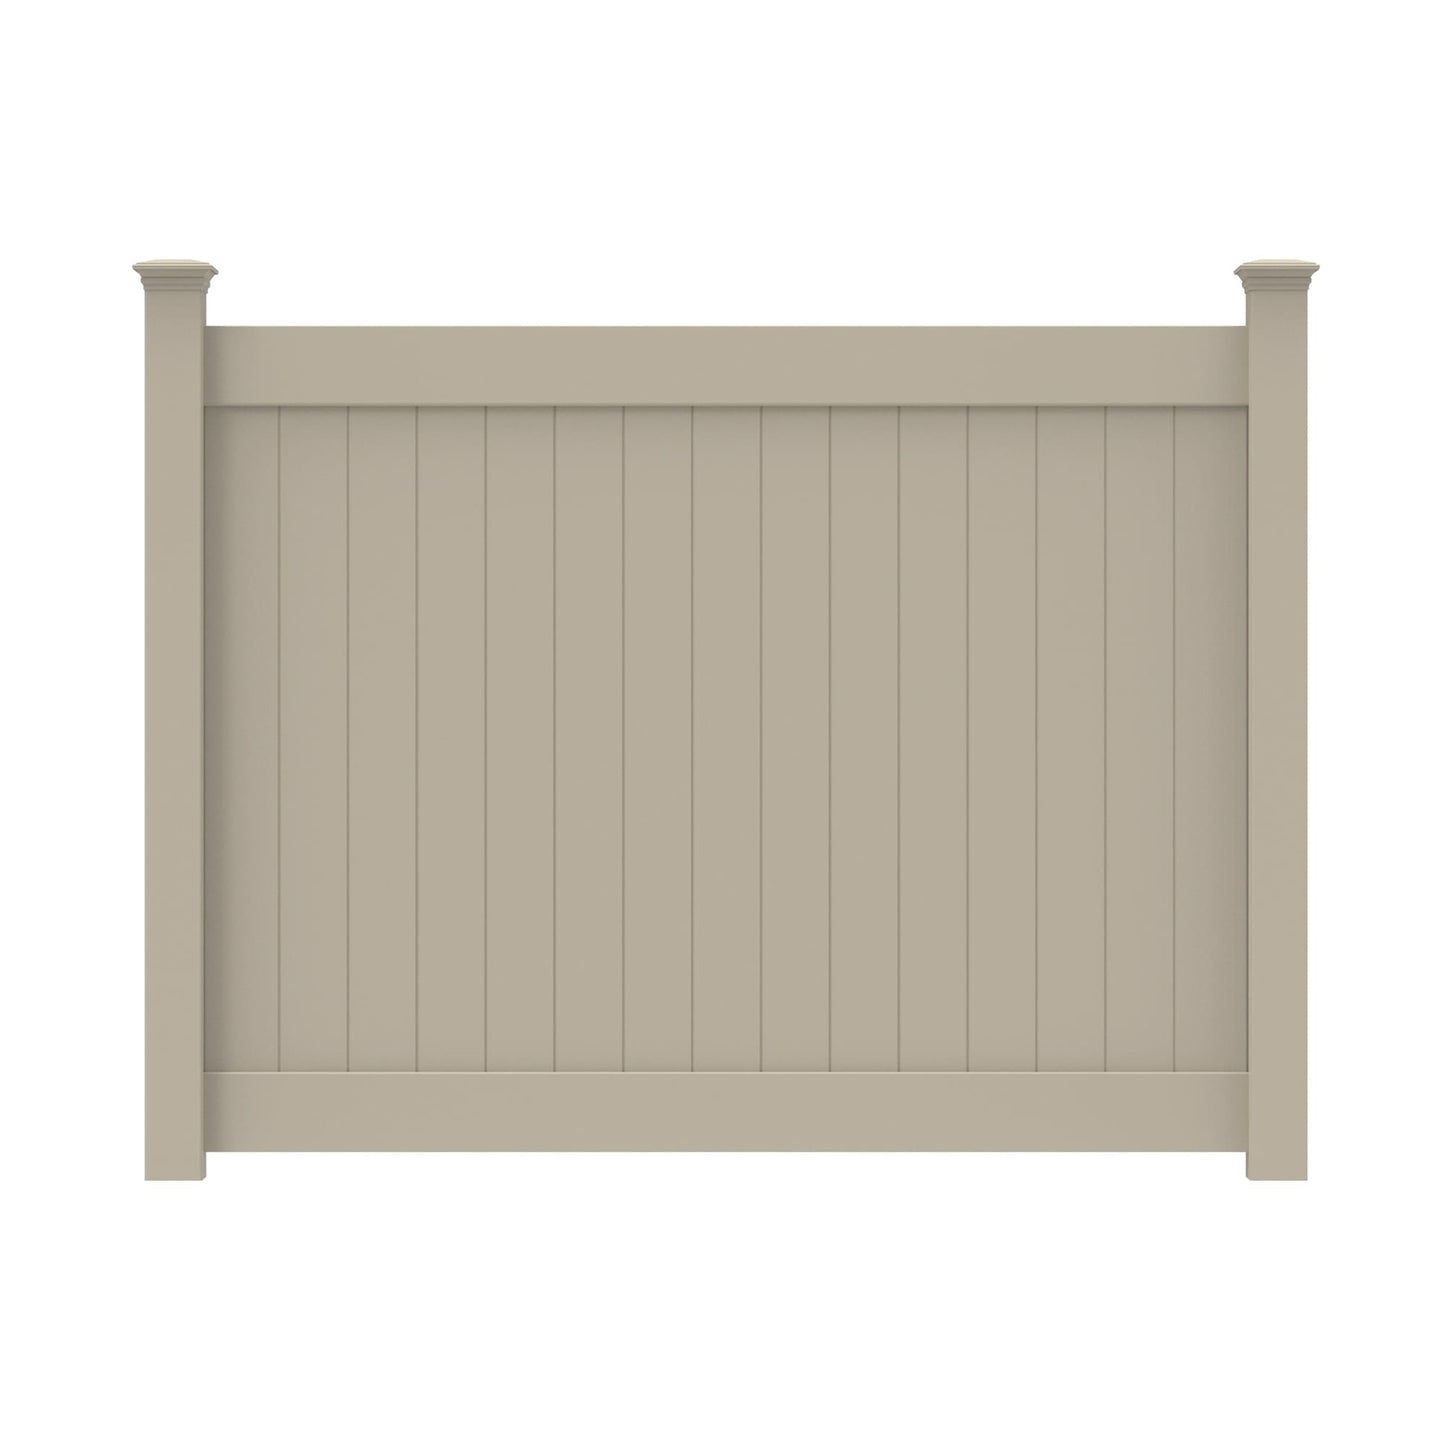 Dogwood Home Series - Fence Panel - 6' x 8'-Vinyl Fence Panels-ActiveYards-Clay-FenceCenter